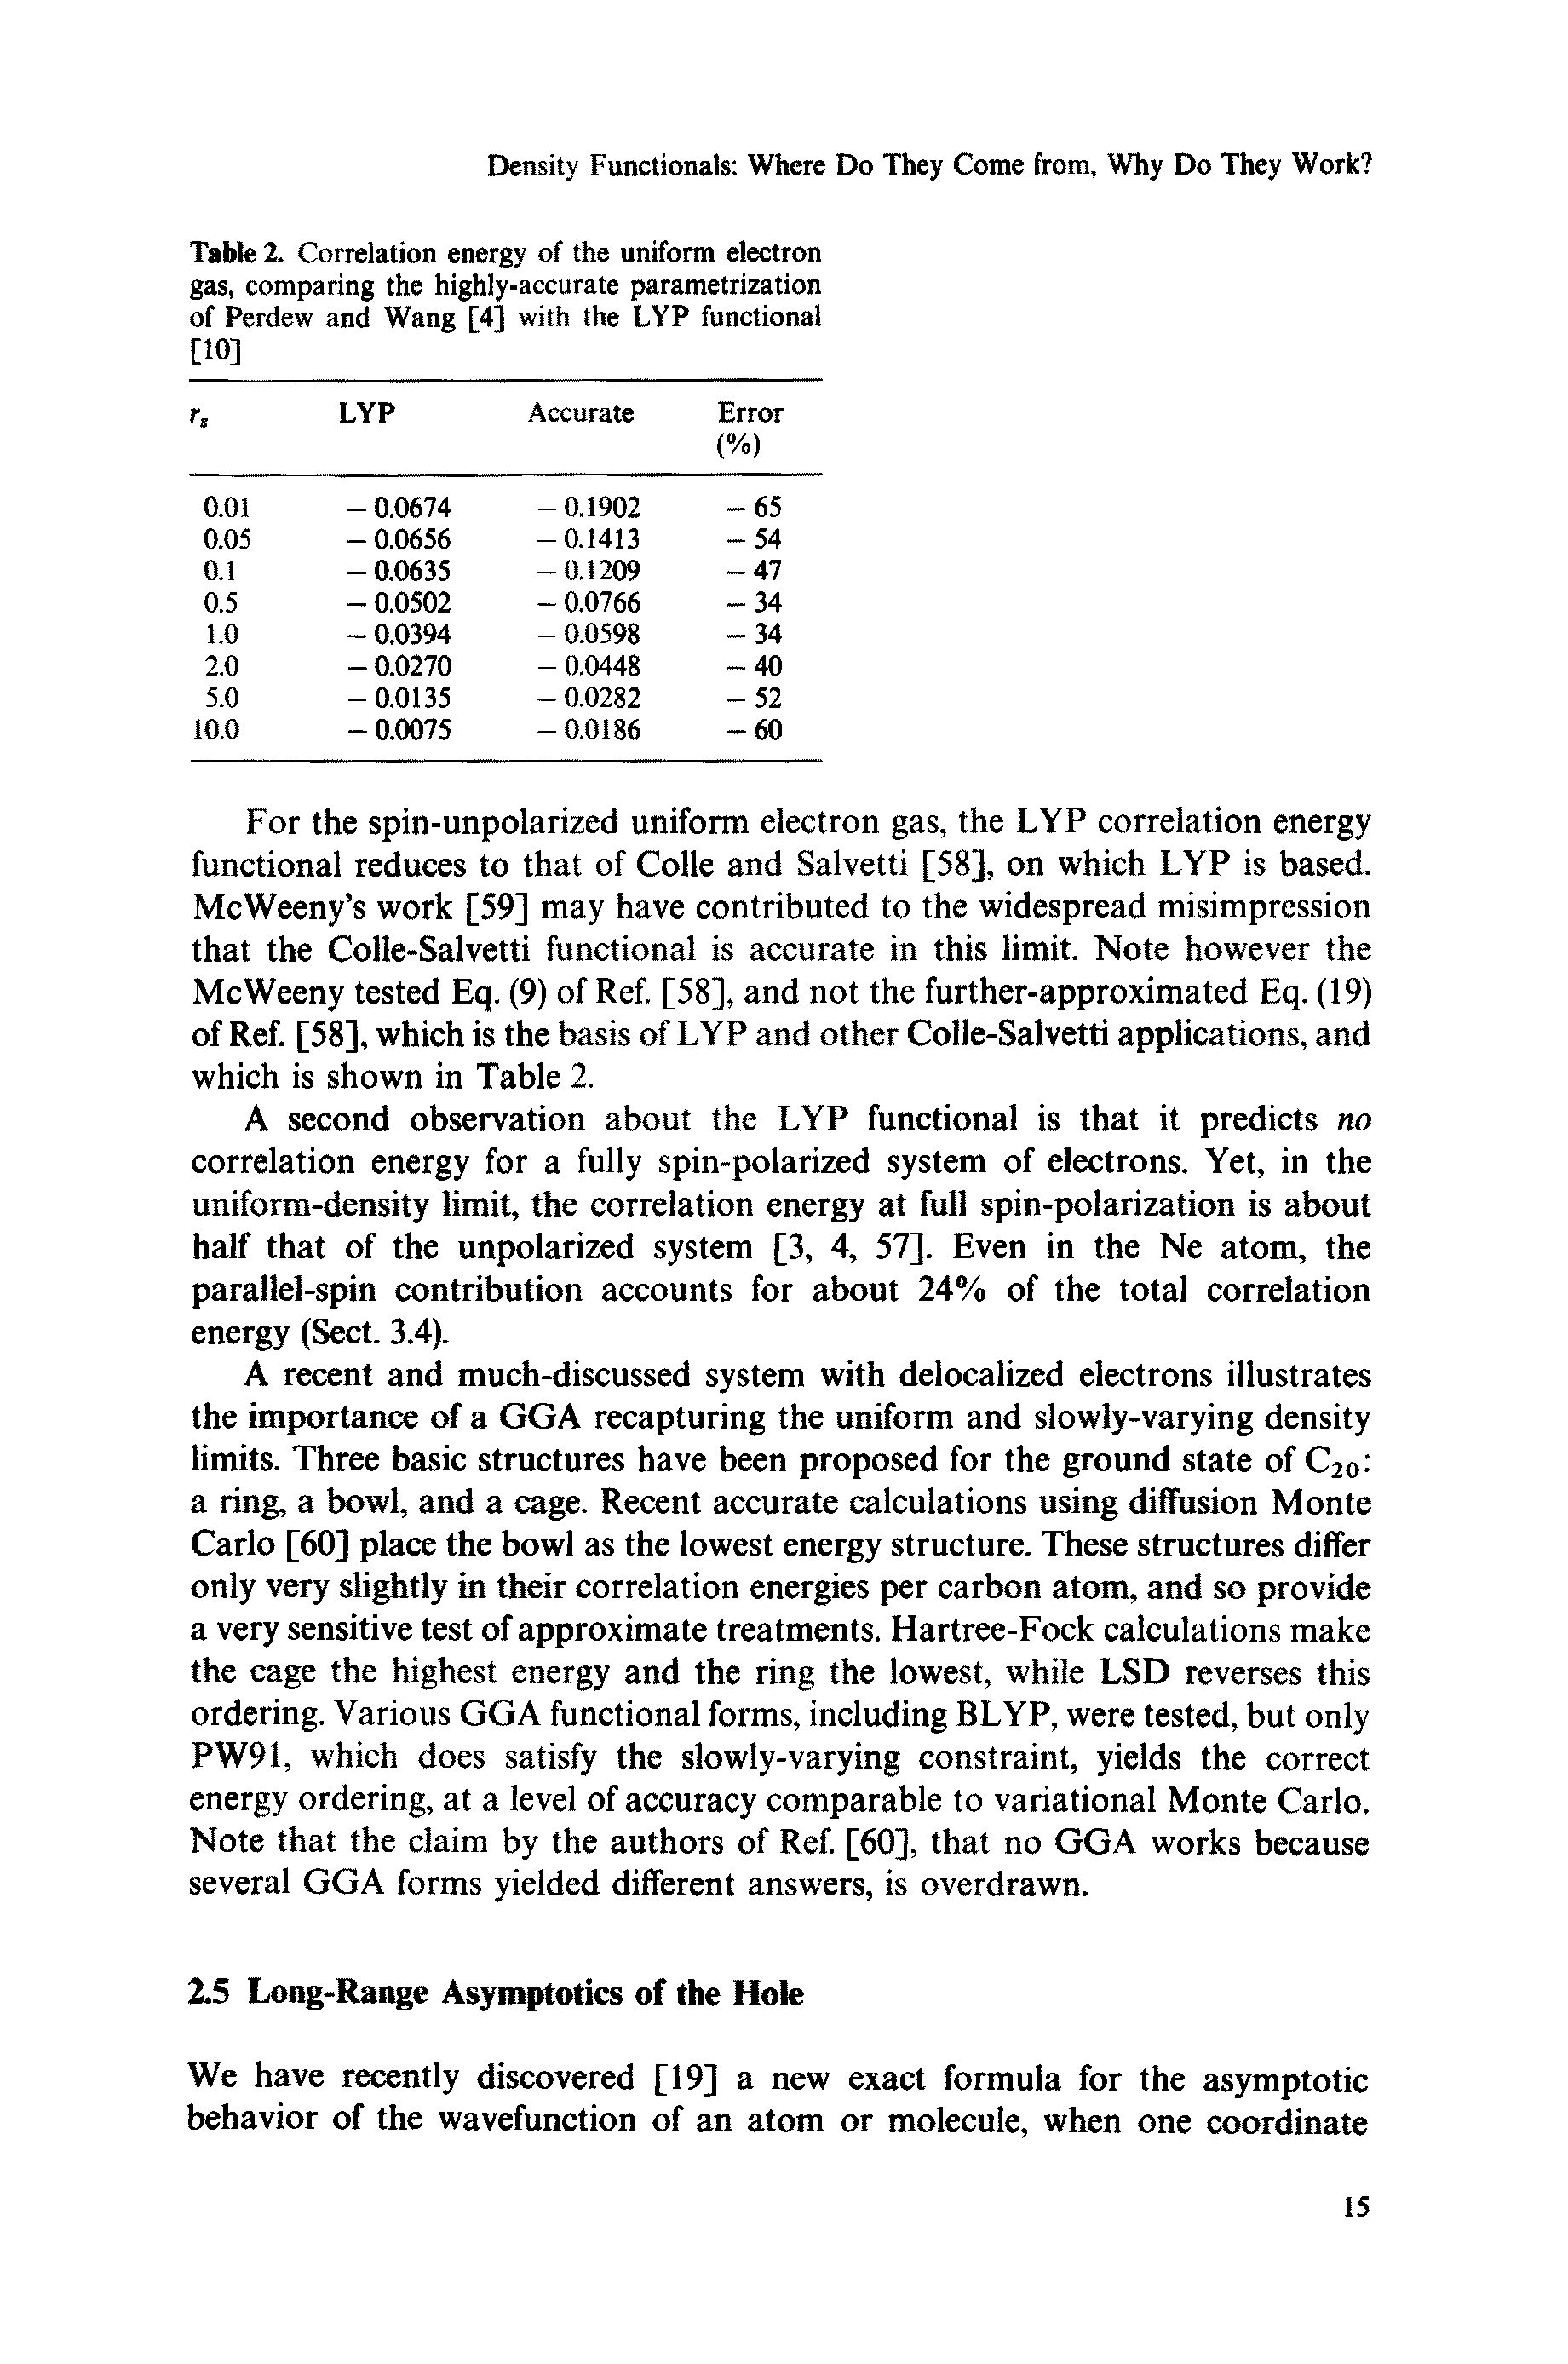 Table 2. Correlation energy of the uniform electron gas, comparing the highly-accurate parametrization of Perdew and Wang [4] with the LYP functional [10]...